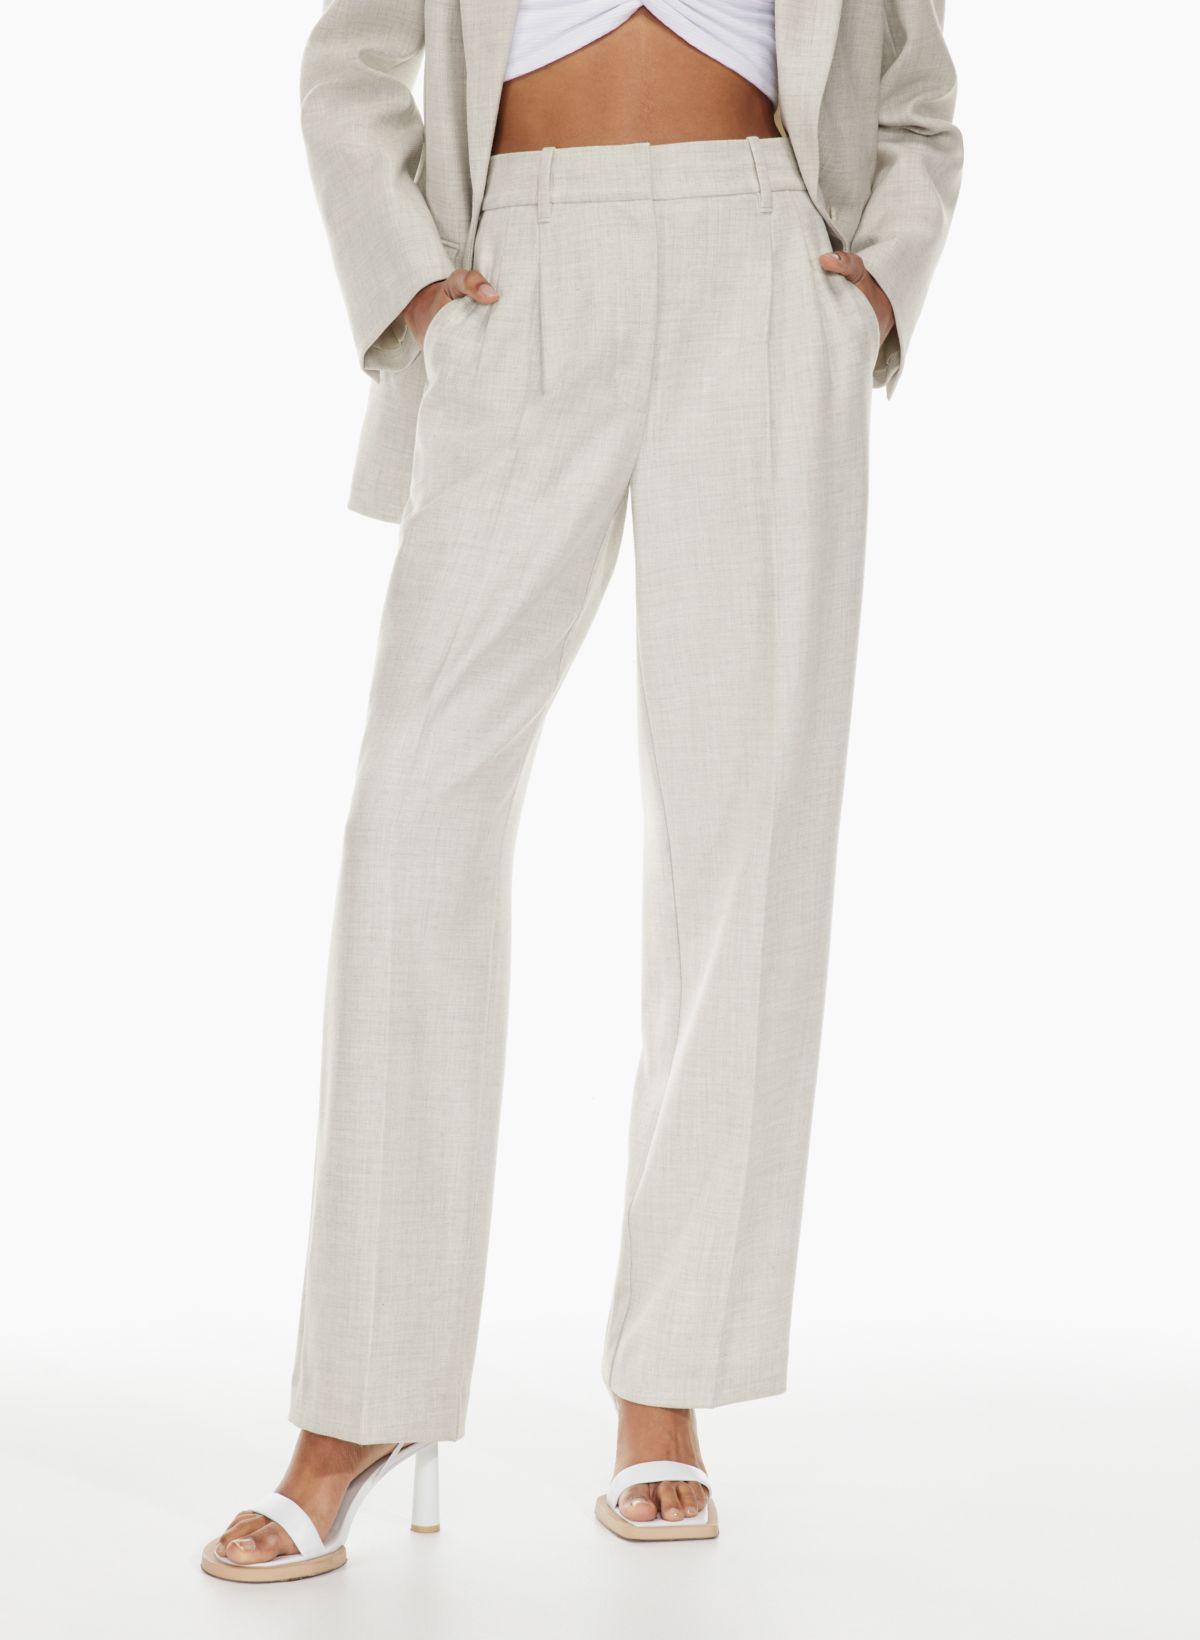 Aritzia effortless pants 🤝 @SKIMS fits everybody square neck